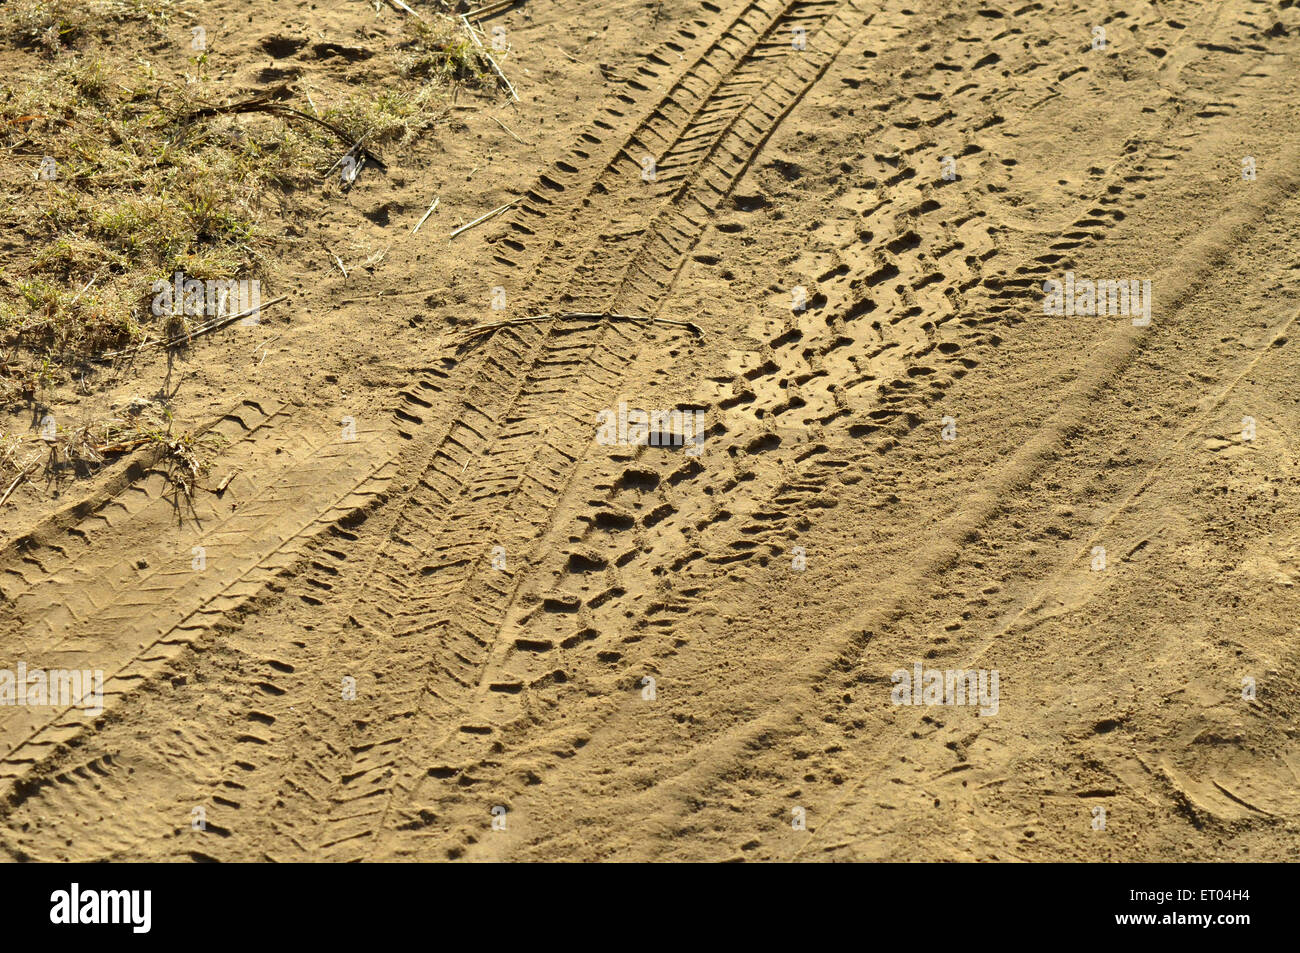 Jeep Tyre marks in mud at Gujarat India Stock Photo